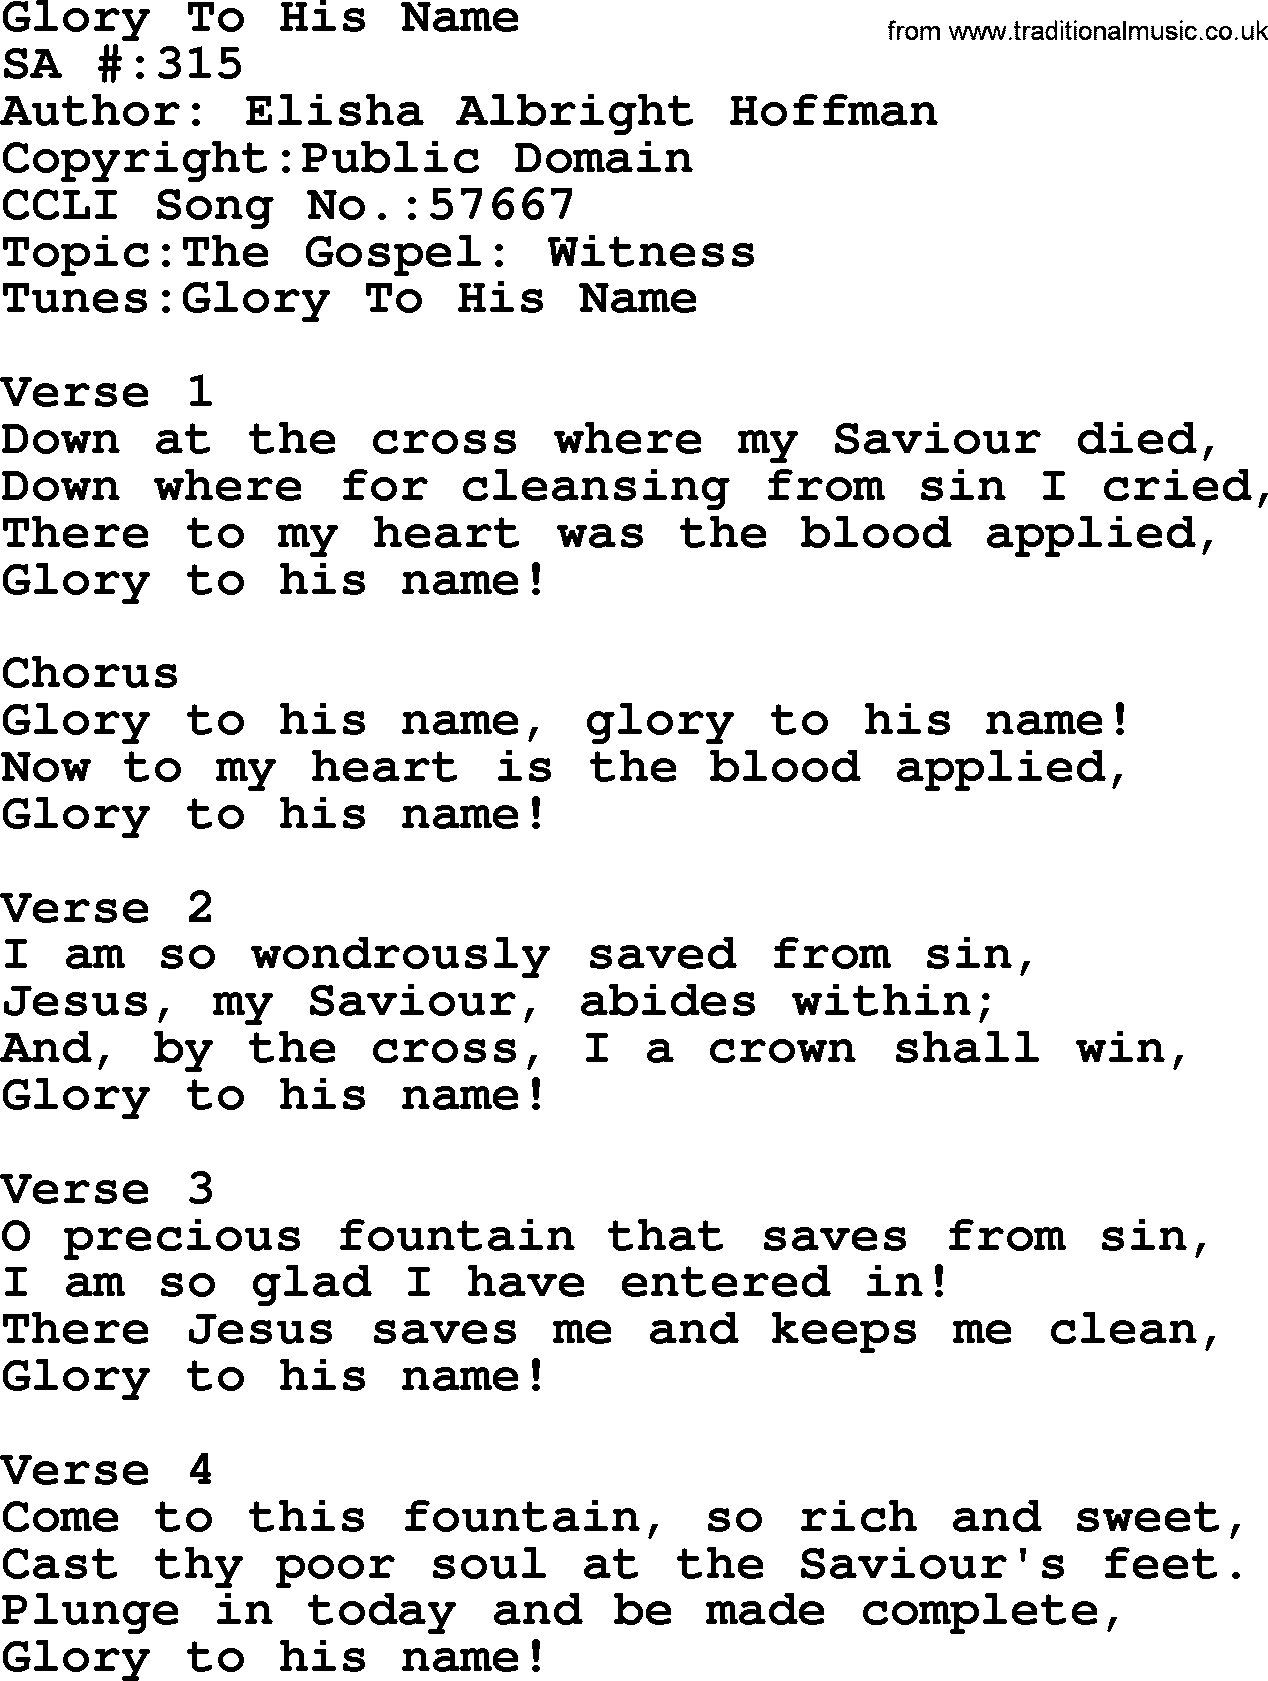 Salvation Army Hymnal, title: Glory To His Name, with lyrics and PDF,